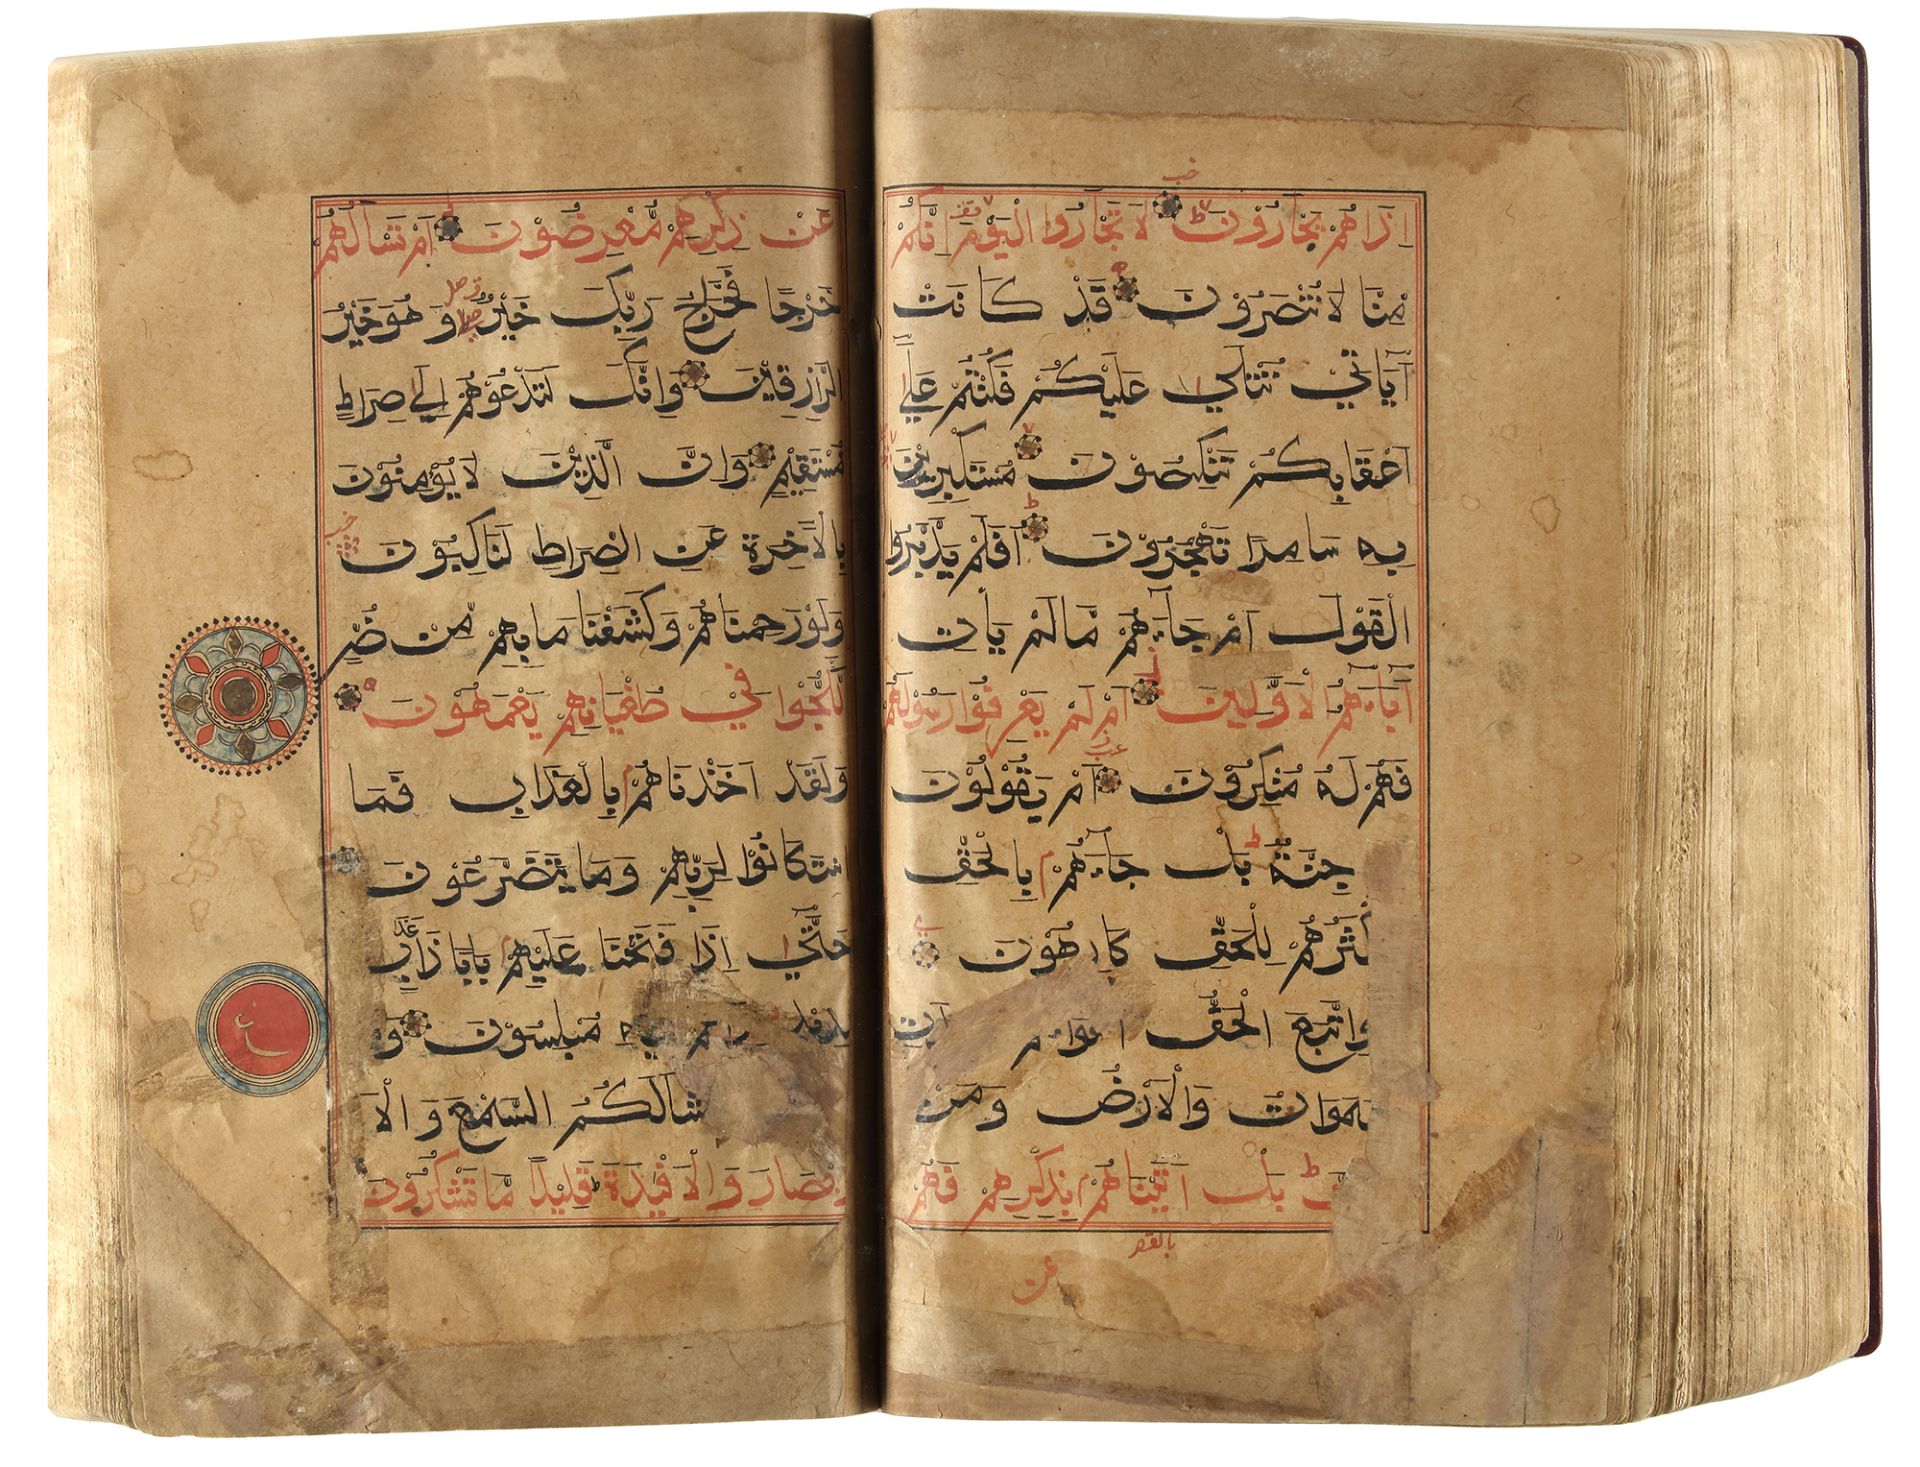 A LARGE ILLUMINATED QURAN, SULTANATE INDIA, LATE 15TH EARLY-16TH CENTURY - Image 4 of 10